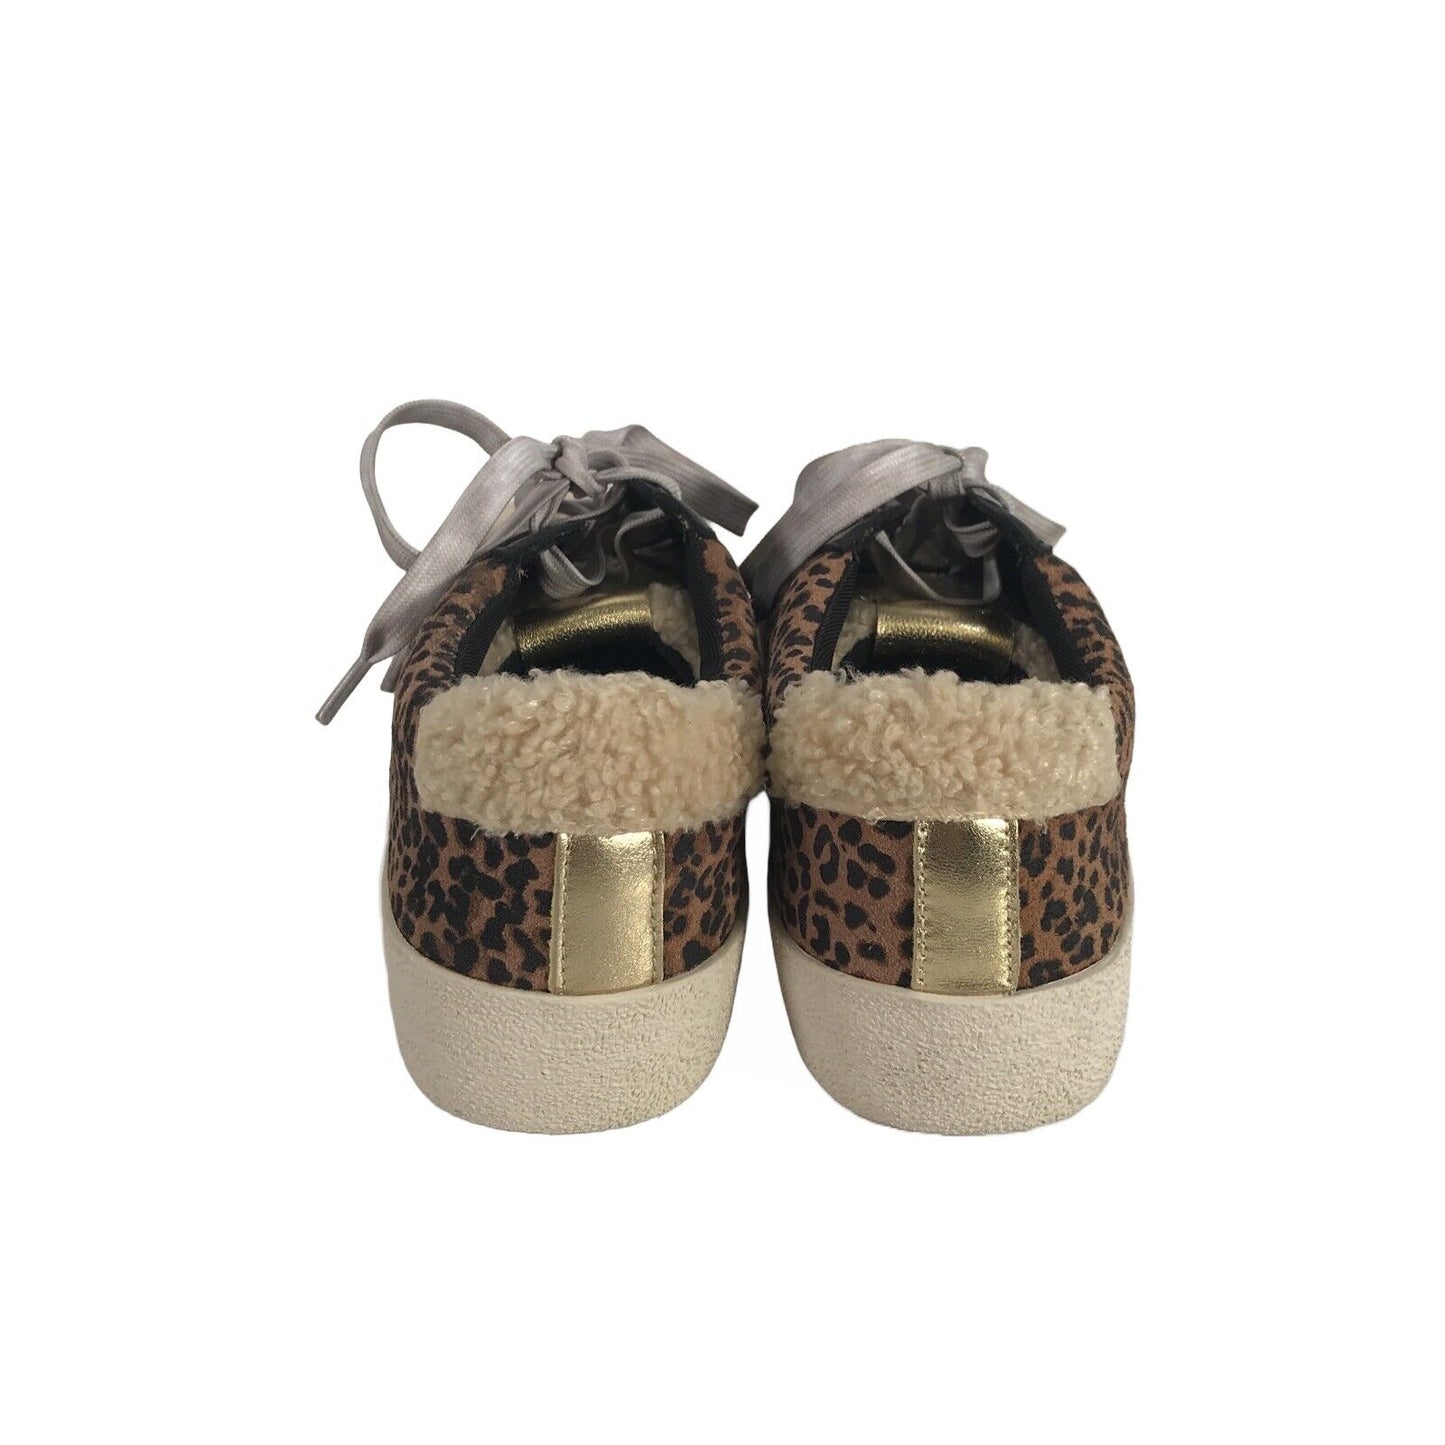 Vince Camuto Women's Brown Animal Print Lace Up Sneakers Shoes Sz 6 M